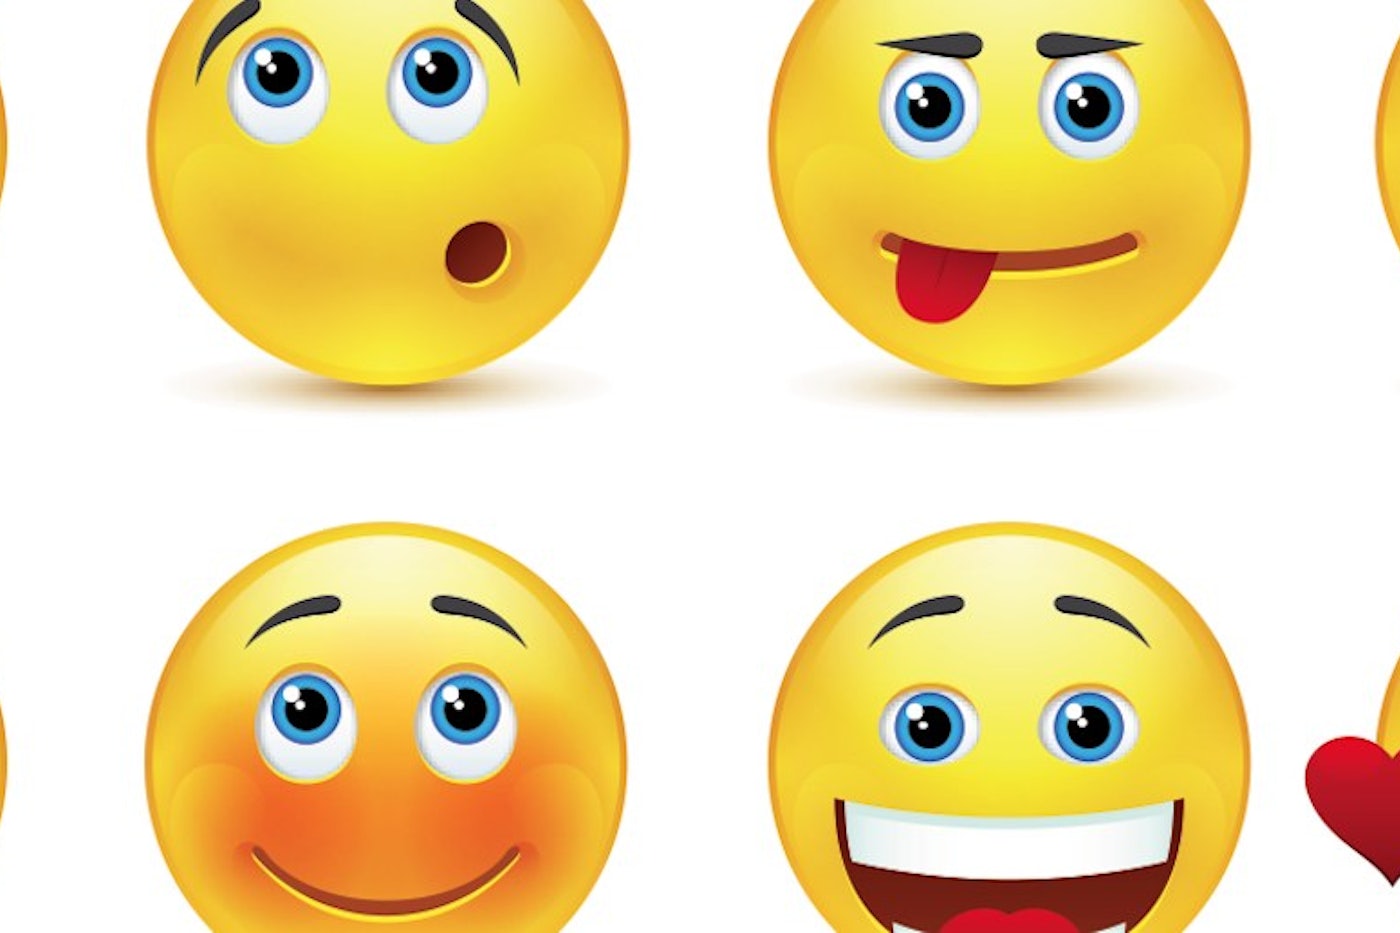 Smiley faces does what mean texting in Meaning Of